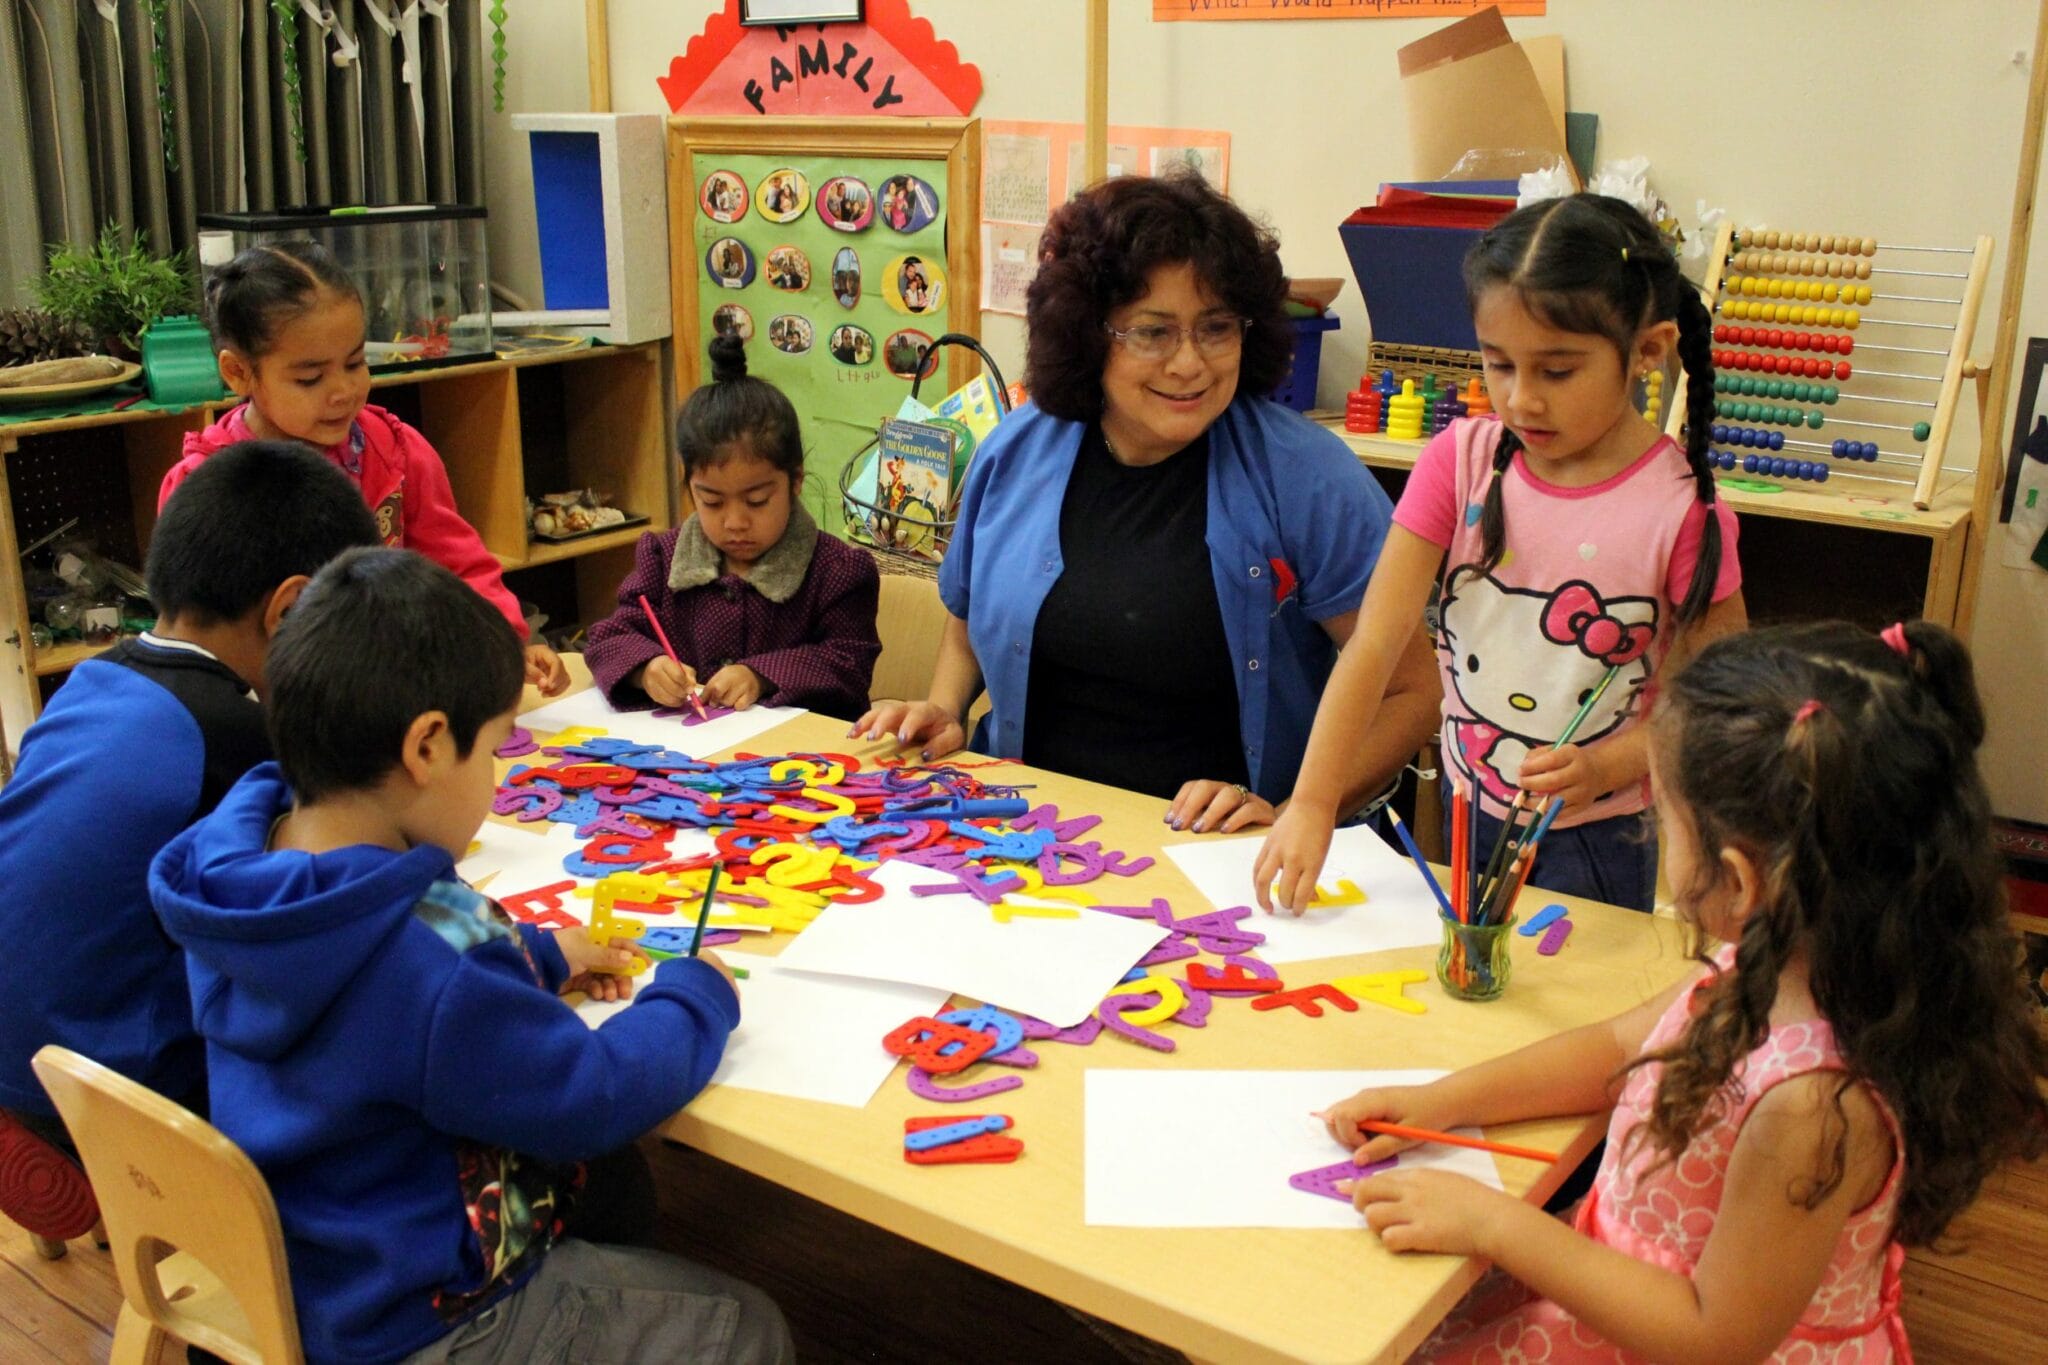 An early educator is sitting at a table with children, guiding them through an activity.